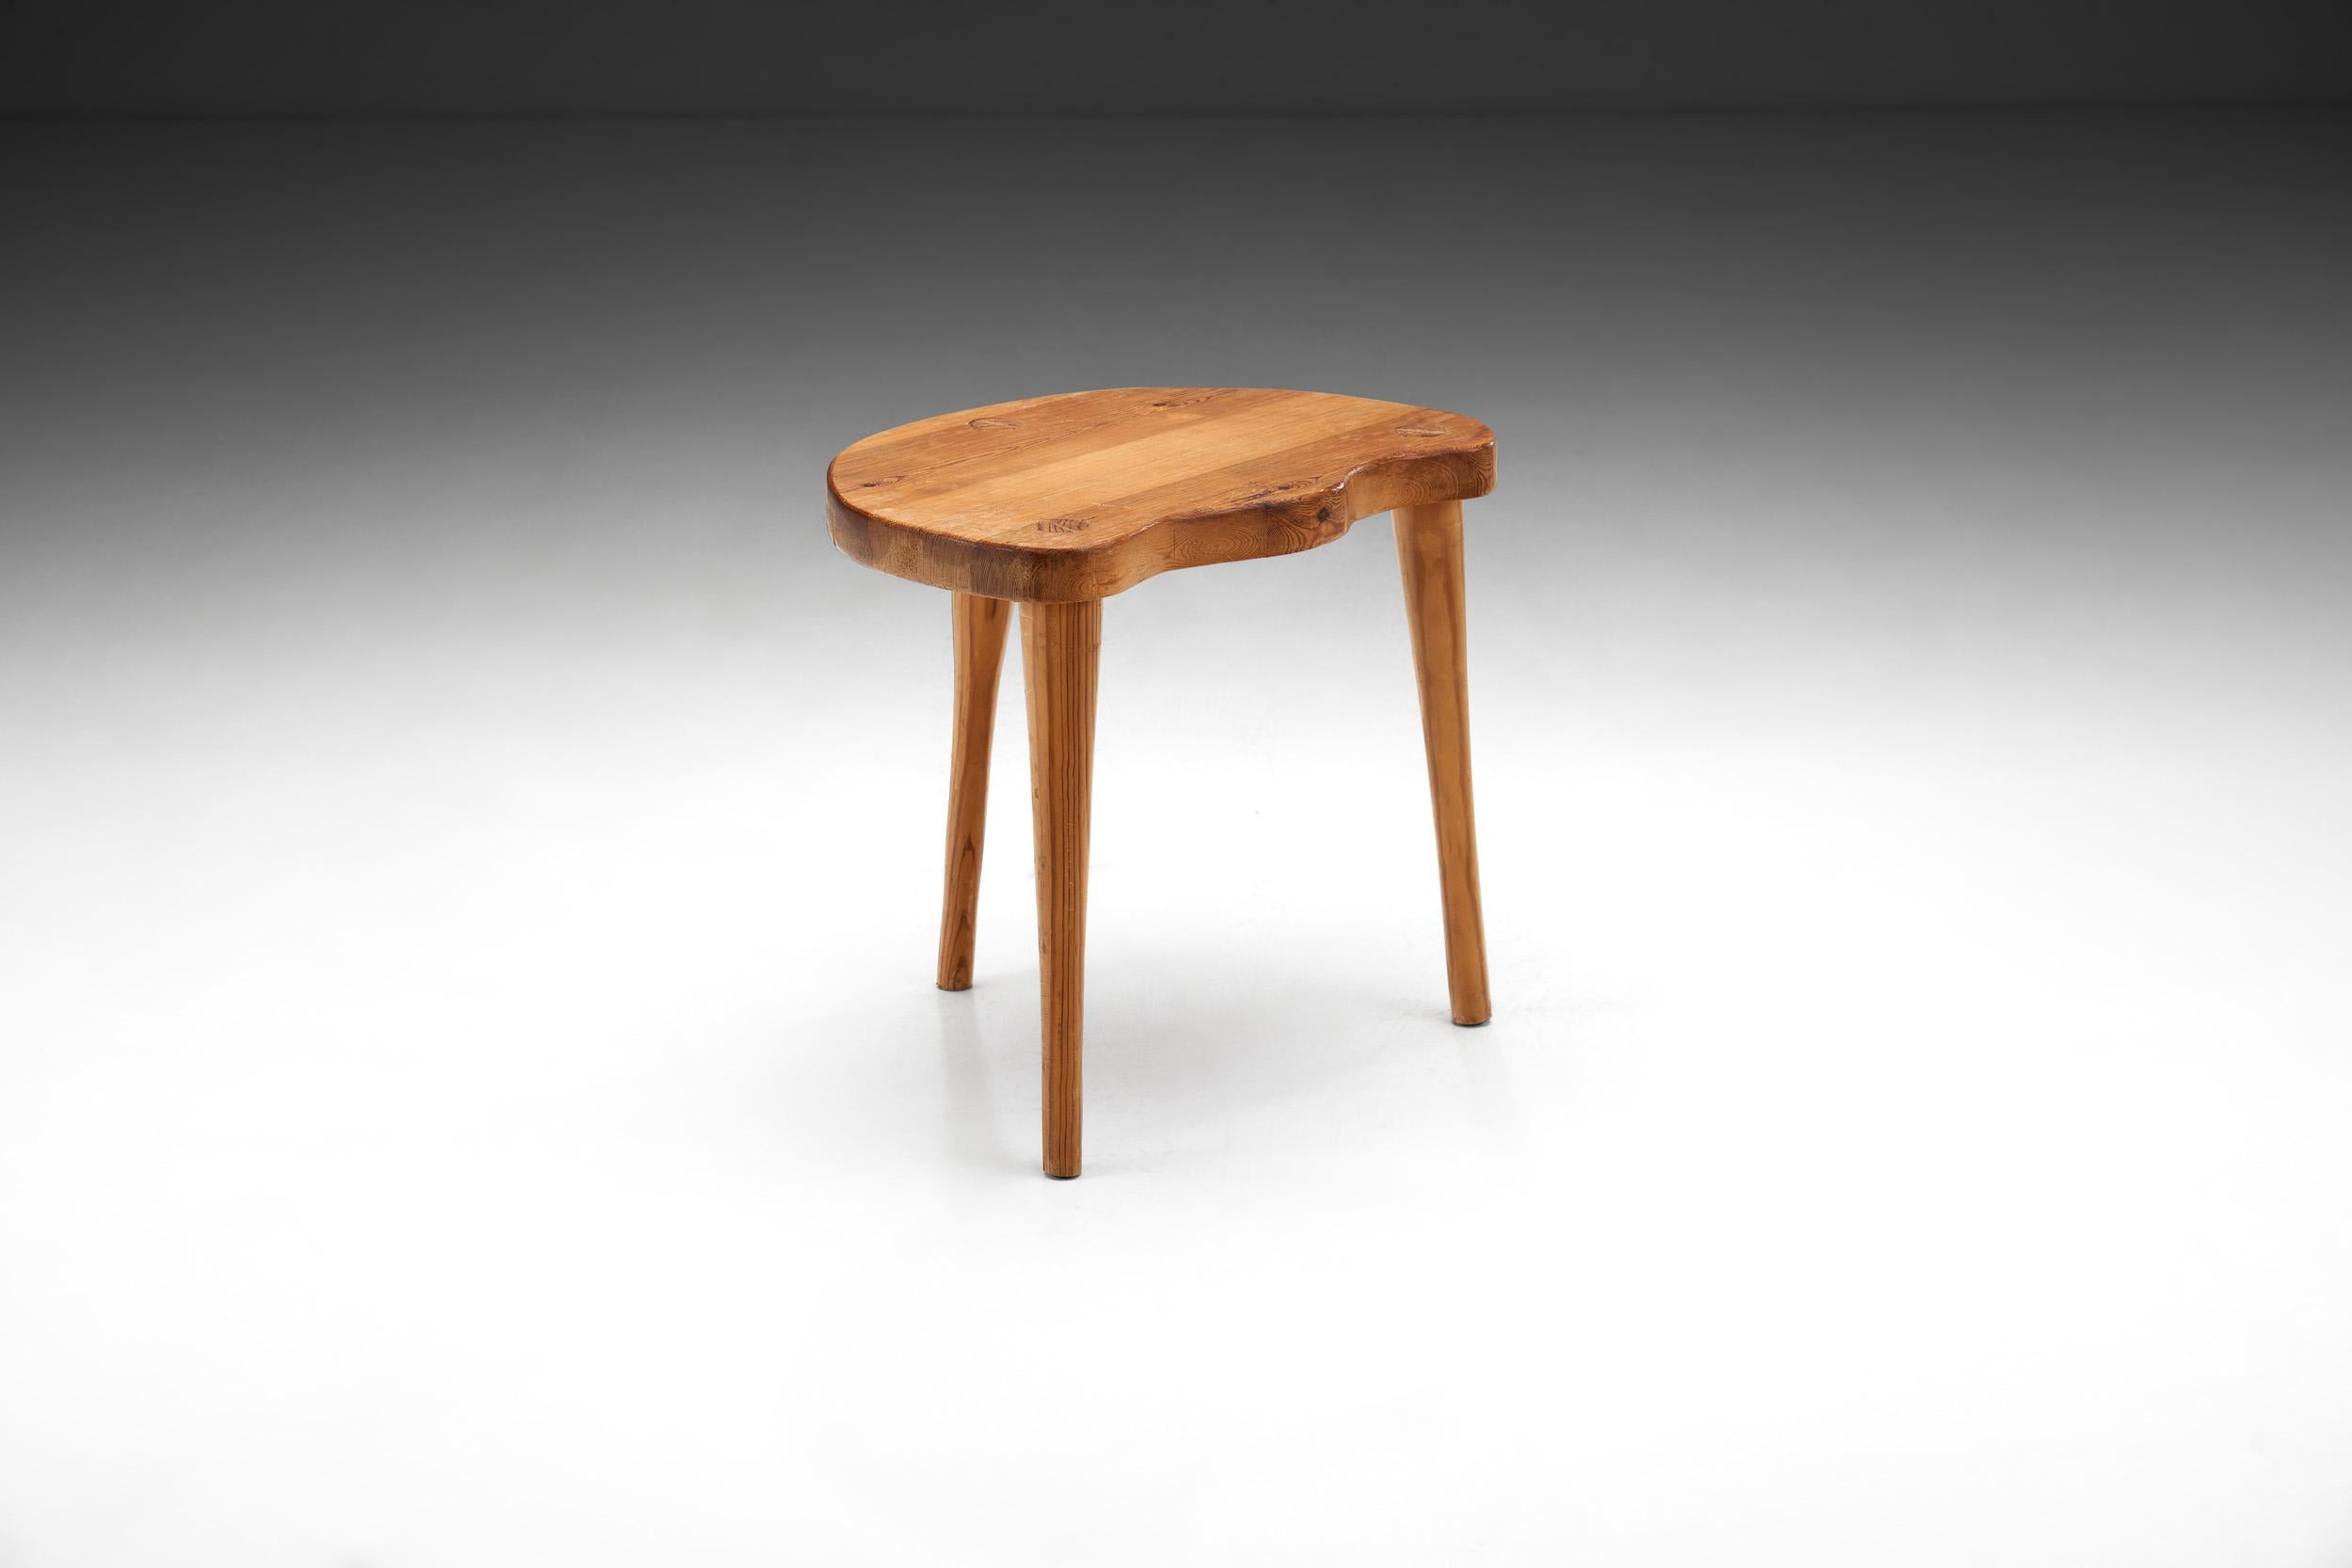 This stool is aesthetically, a tempered Modernism in design: clean forms without exaggeration with the high-quality work of Danish cabinetmakers. Humble in its material and size, this pine stool still draws attention thanks to its distinctive look